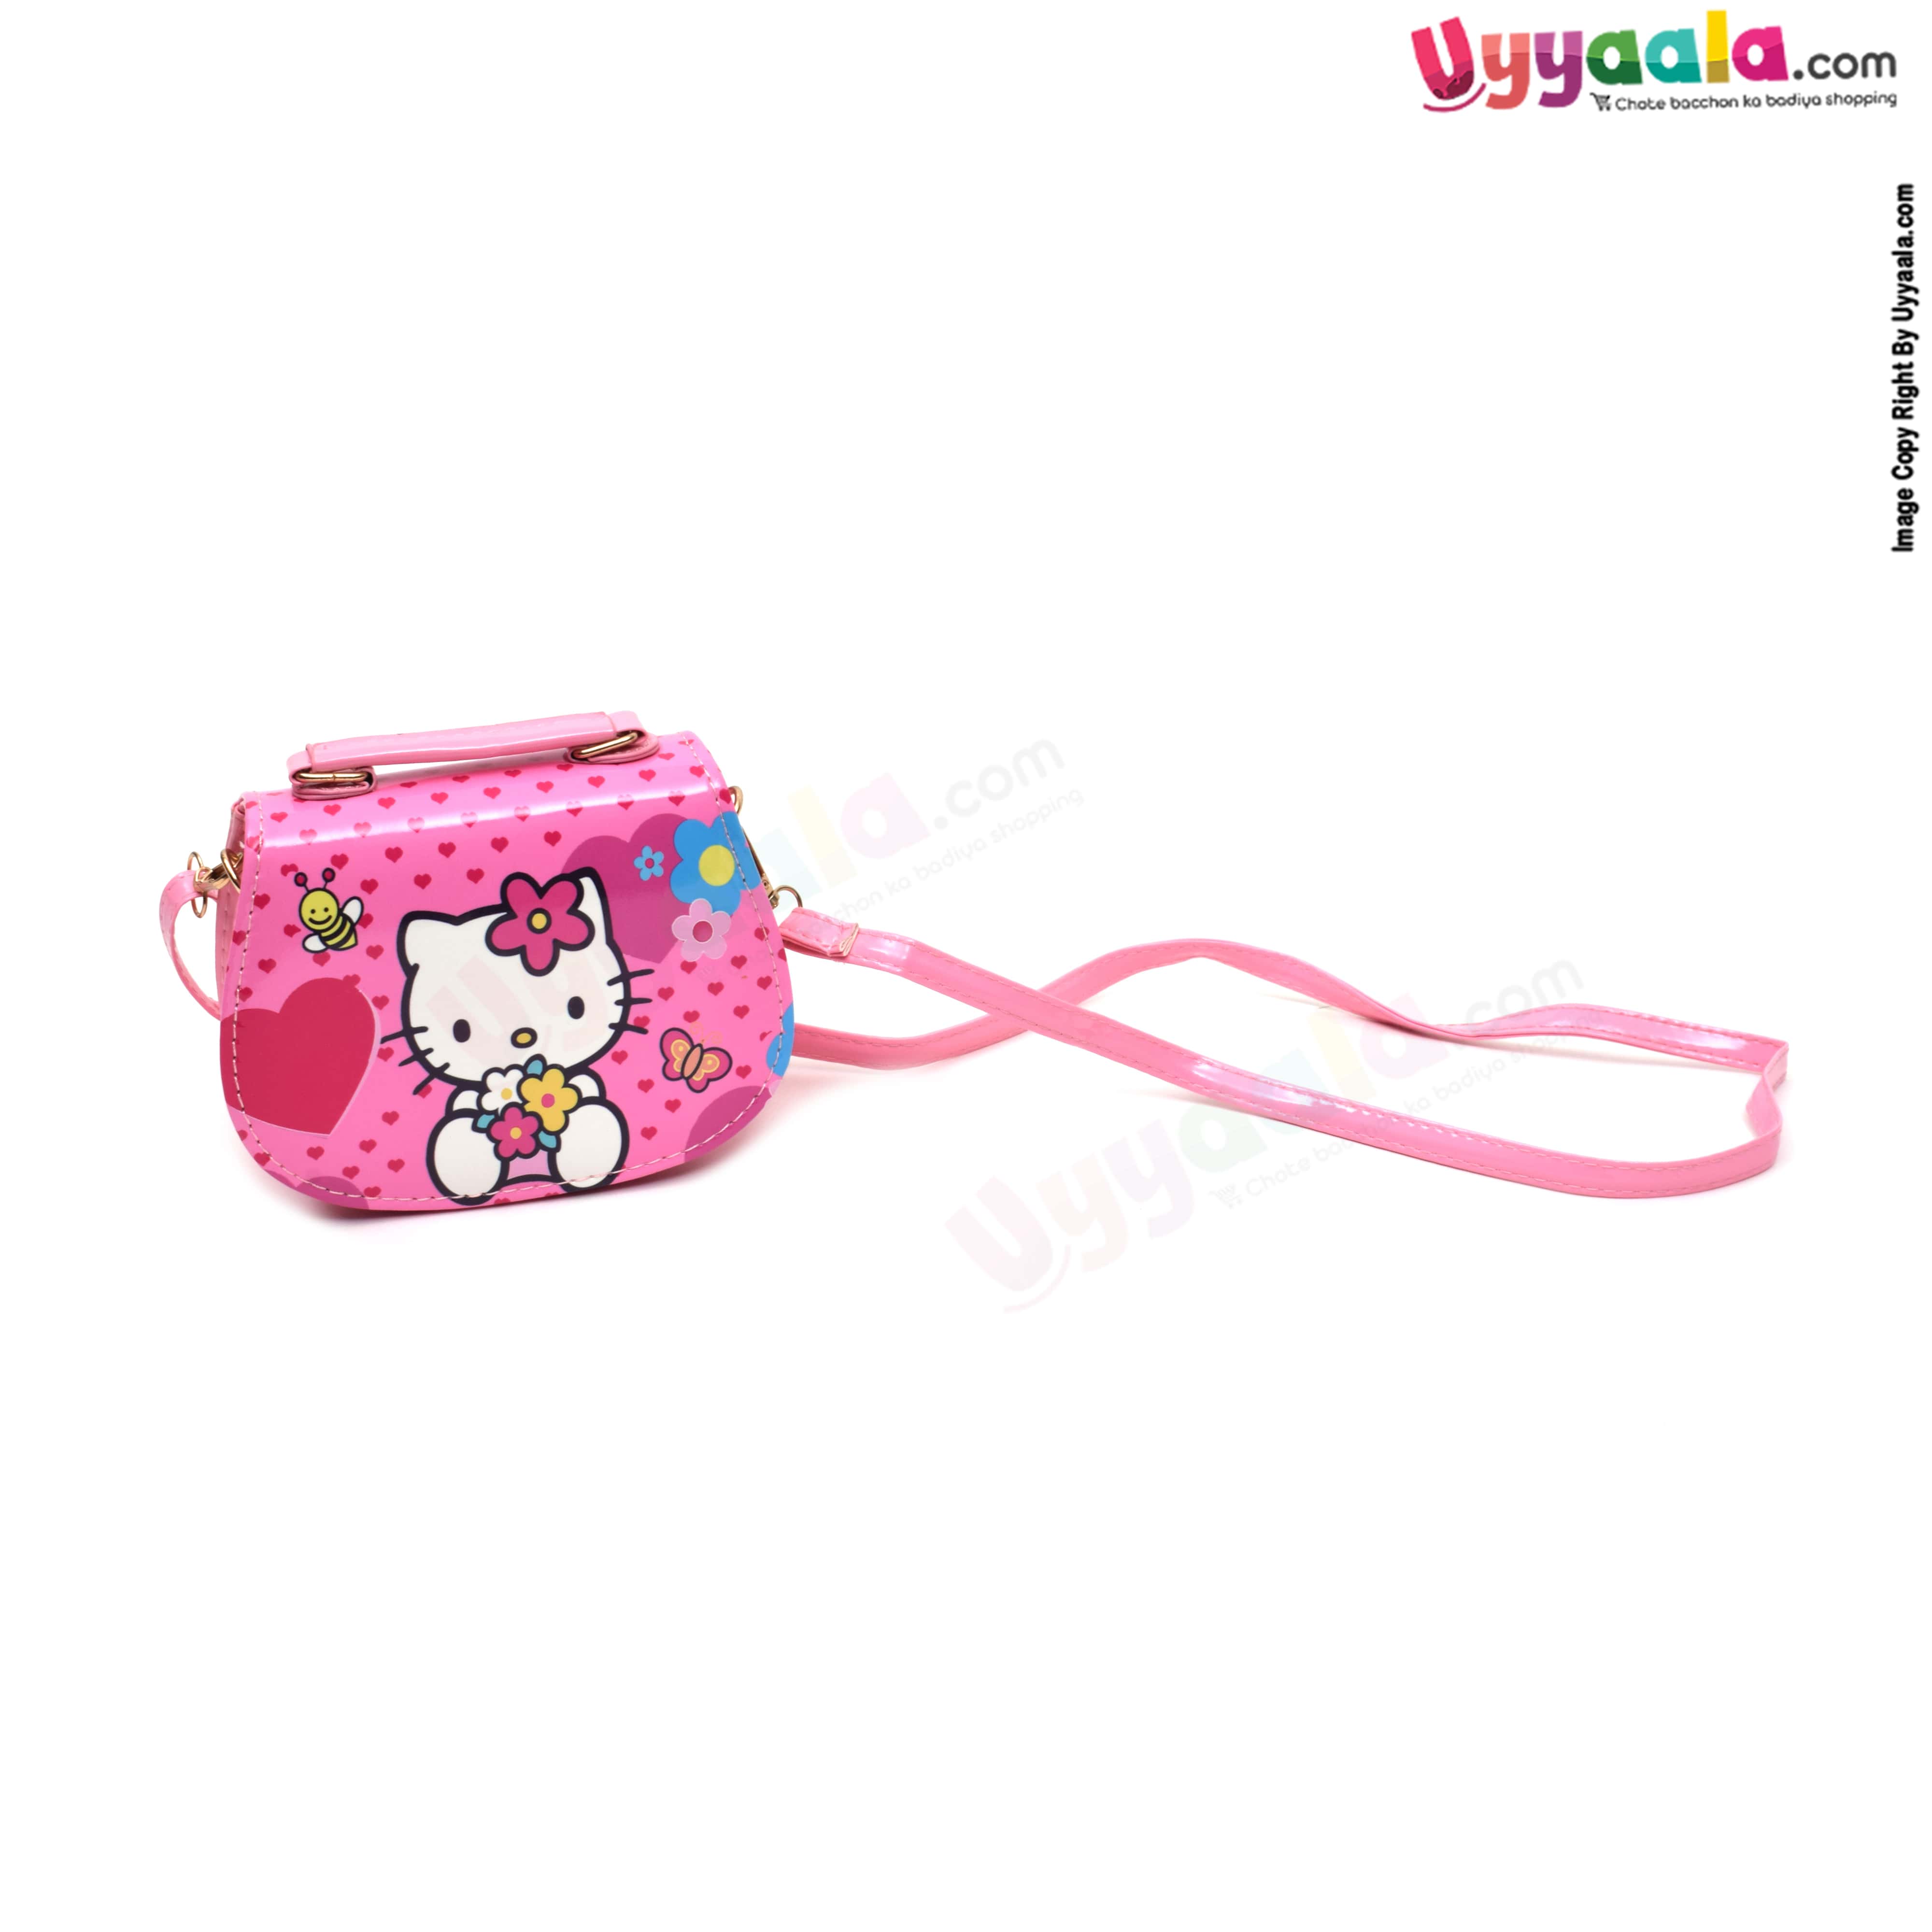 kids Party wear hand bag for baby girl with adjustable strap & hello kitty print, age 3+ years